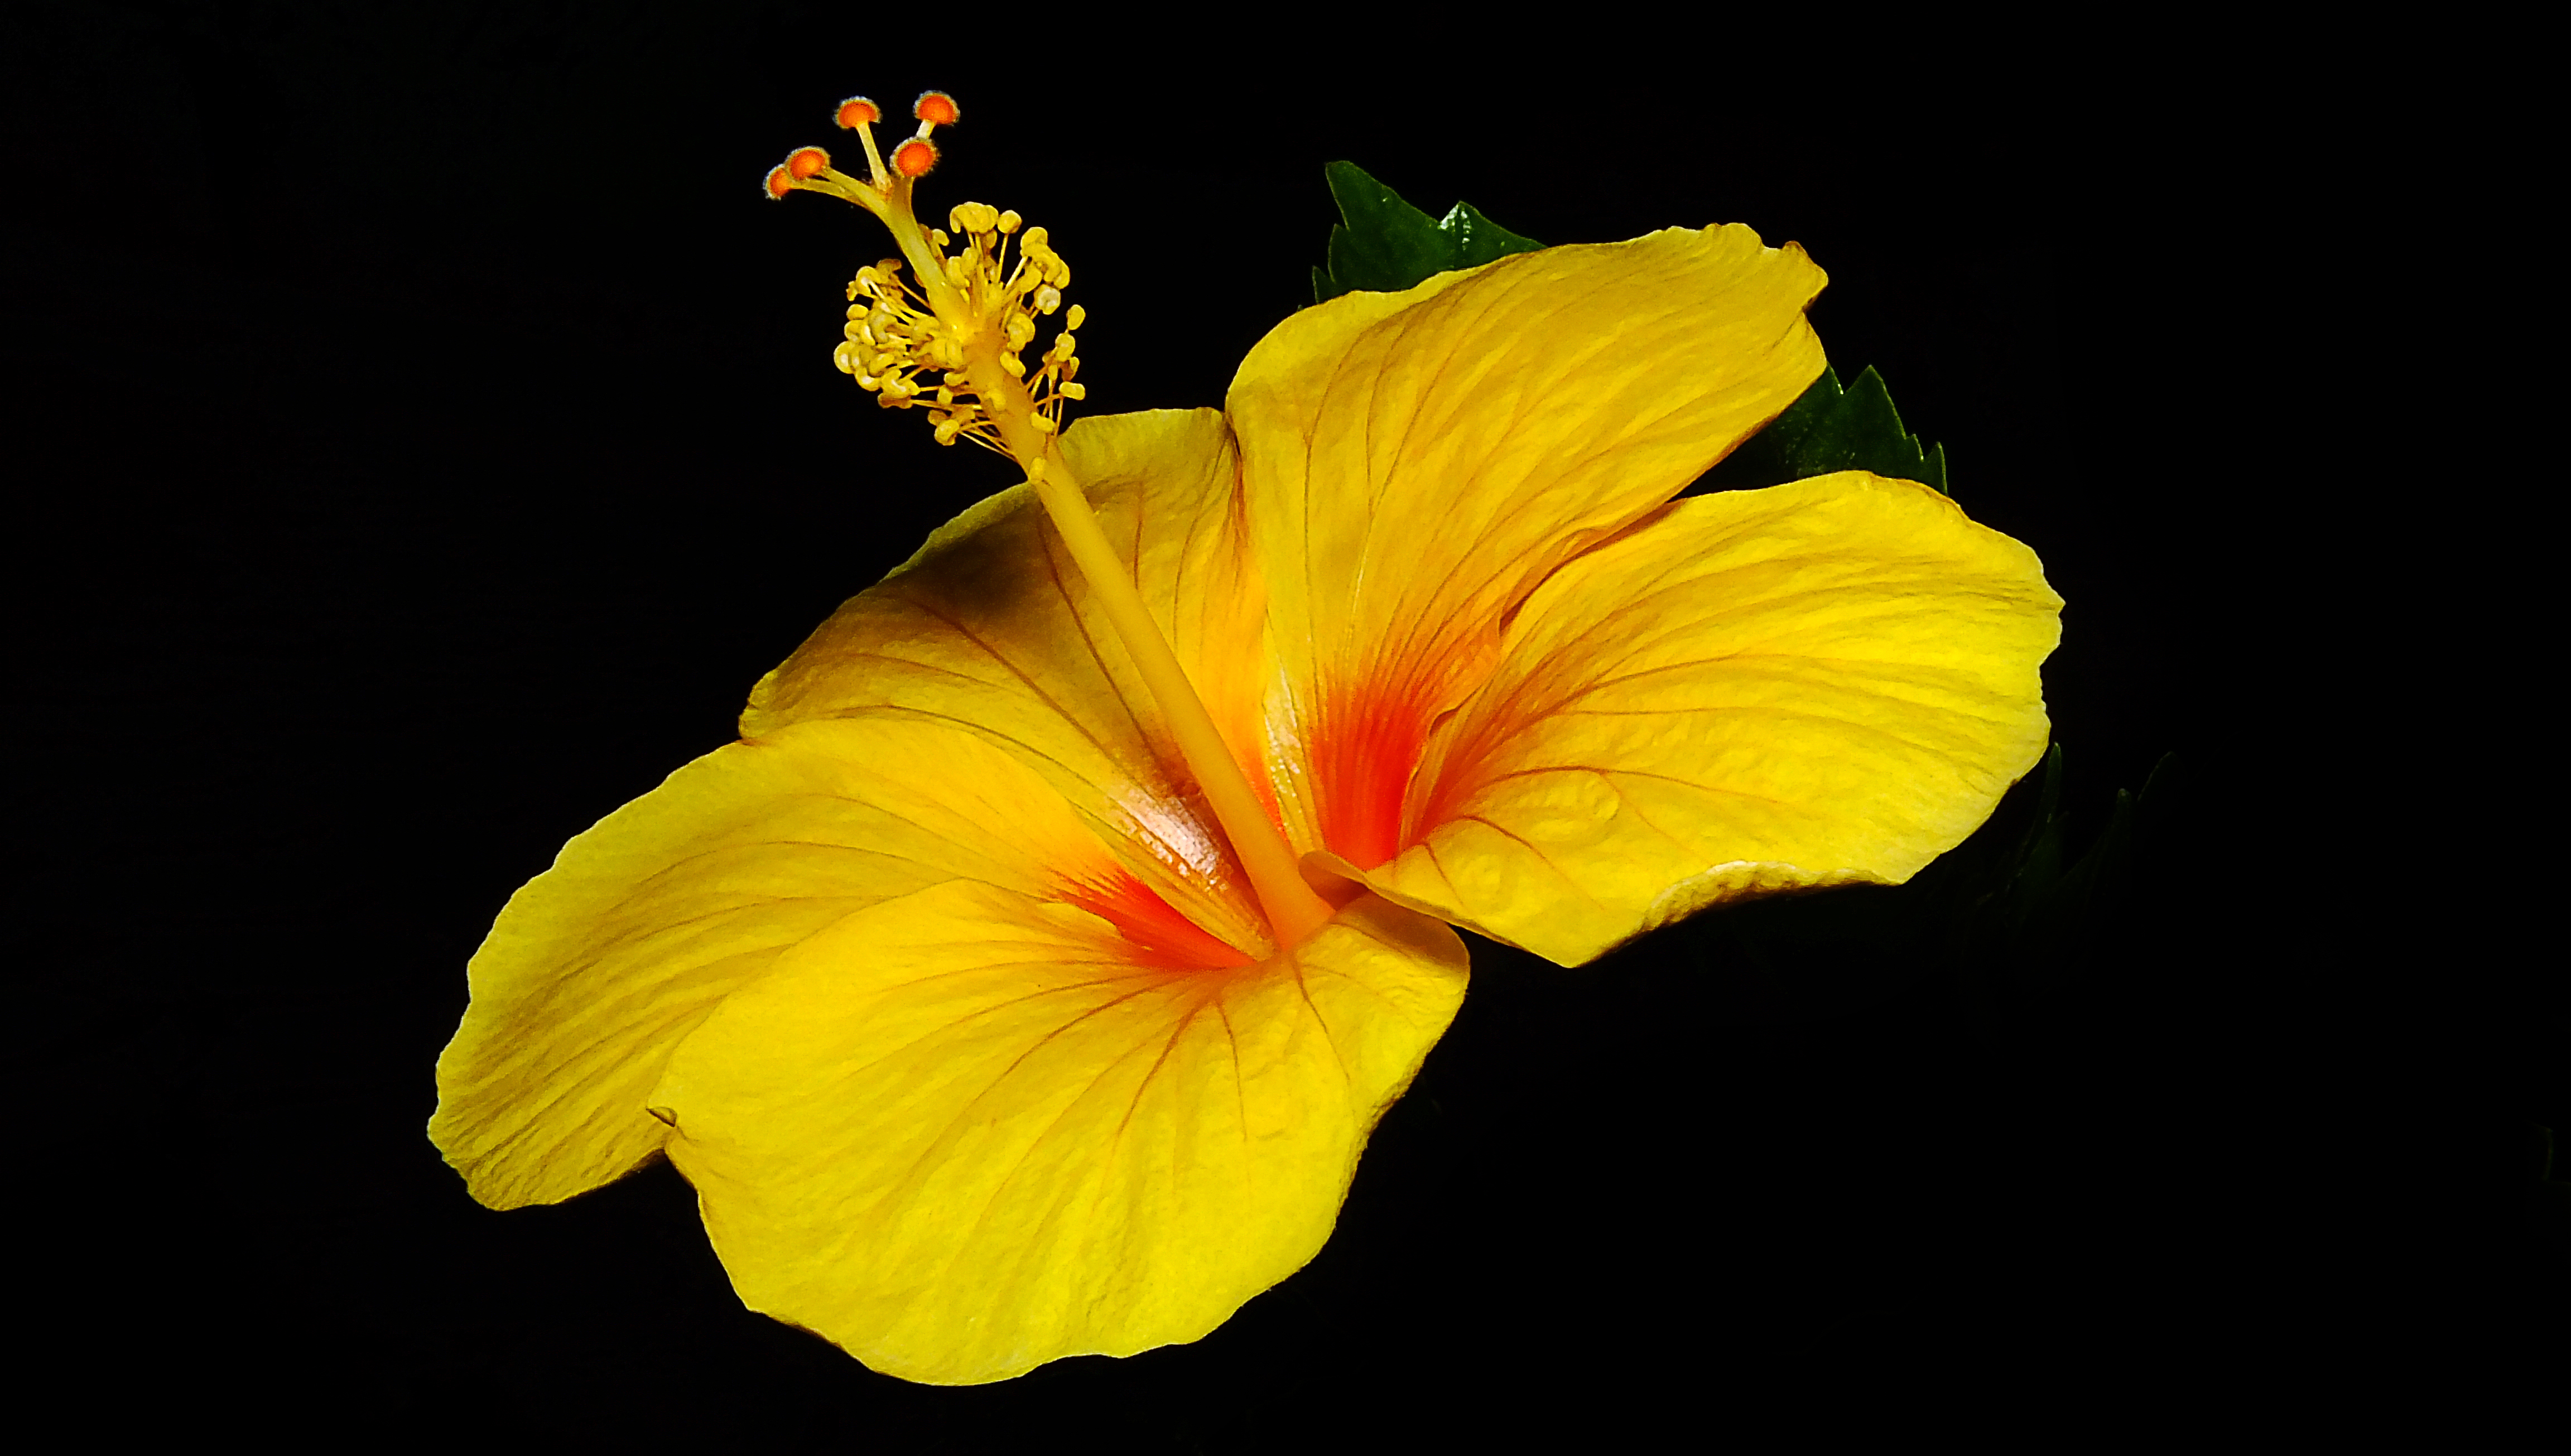 Hibiscus Wallpapers Pictures Images HD Wallpapers Download Free Map Images Wallpaper [wallpaper376.blogspot.com]